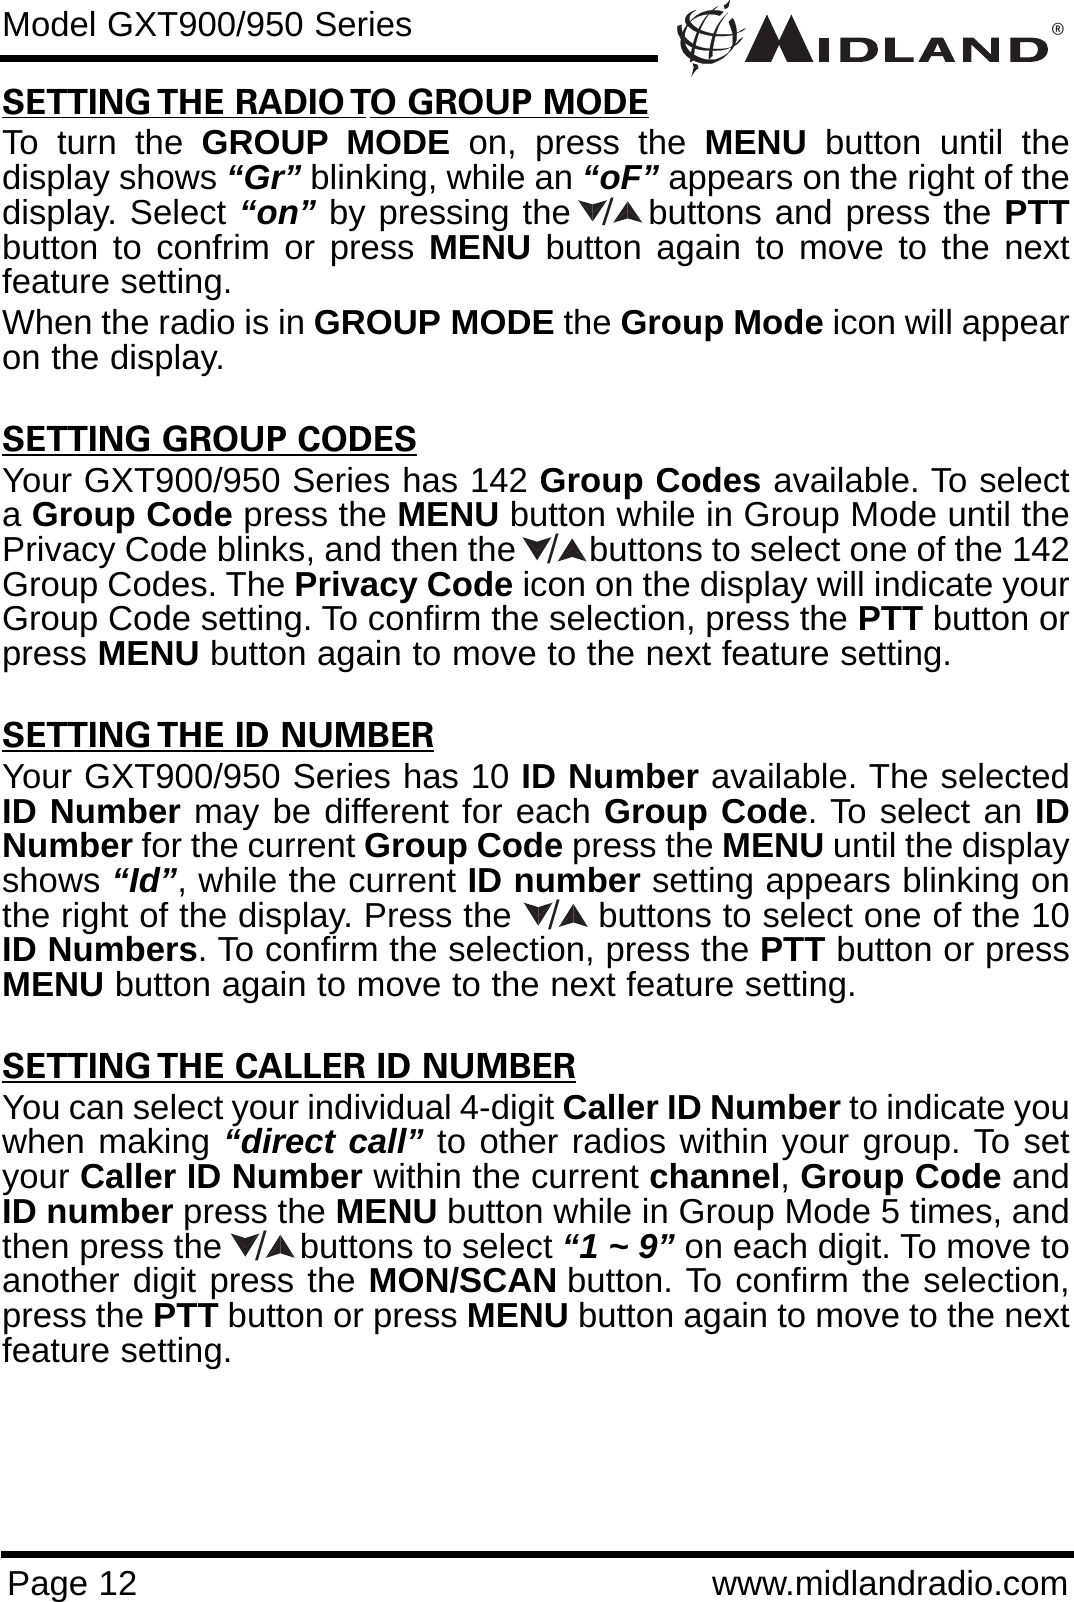 ®Page 12 www.midlandradio.comSETTING THE RADIO TO GROUP MODETo turn the GROUP MODE on, press the MENU button until thedisplay shows “Gr” blinking, while an “oF” appears on the right of thedisplay. Select “on” by pressing the      buttons and press the PTTbutton to confrim or press MENU button again to move to the nextfeature setting. When the radio is in GROUP MODE the Group Mode icon will appearon the display.SETTING GROUP CODESYour GXT900/950 Series has 142 Group Codes available. To selecta Group Code press the MENU button while in Group Mode until thePrivacy Code blinks, and then the        buttons to select one of the 142Group Codes. The Privacy Code icon on the display will indicate yourGroup Code setting. To confirm the selection, press the PTT button orpress MENU button again to move to the next feature setting.SETTING THE ID NUMBERYour GXT900/950 Series has 10 ID Number available. The selectedID Number may be different for each Group Code. To select an IDNumber for the current Group Code press the MENU until the displayshows “Id”, while the current ID number setting appears blinking onthe right of the display. Press the        buttons to select one of the 10ID Numbers. To confirm the selection, press the PTT button or pressMENU button again to move to the next feature setting.SETTING THE CALLER ID NUMBERYou can select your individual 4-digit Caller ID Number to indicate youwhen making “direct call” to other radios within your group. To setyour Caller ID Number within the current channel, Group Code andID number press the MENU button while in Group Mode 5 times, andthen press the        buttons to select “1 ~ 9” on each digit. To move toanother digit press the MON/SCAN button. To confirm the selection,press the PTT button or press MENU button again to move to the nextfeature setting. Model GXT900/950 Series////